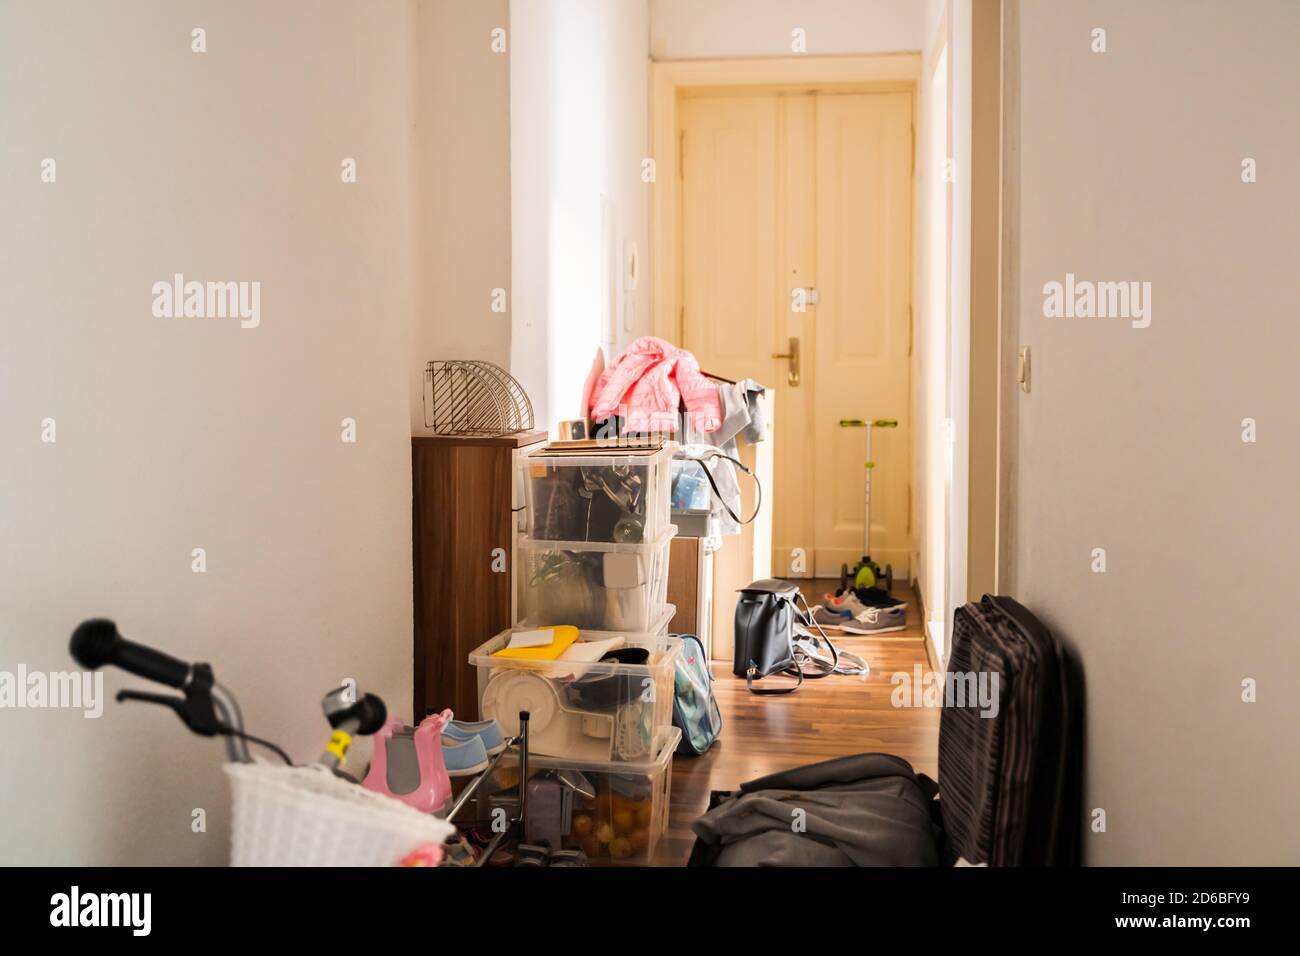 Messy Home Room With Junk And Packed Trash Stock Photo